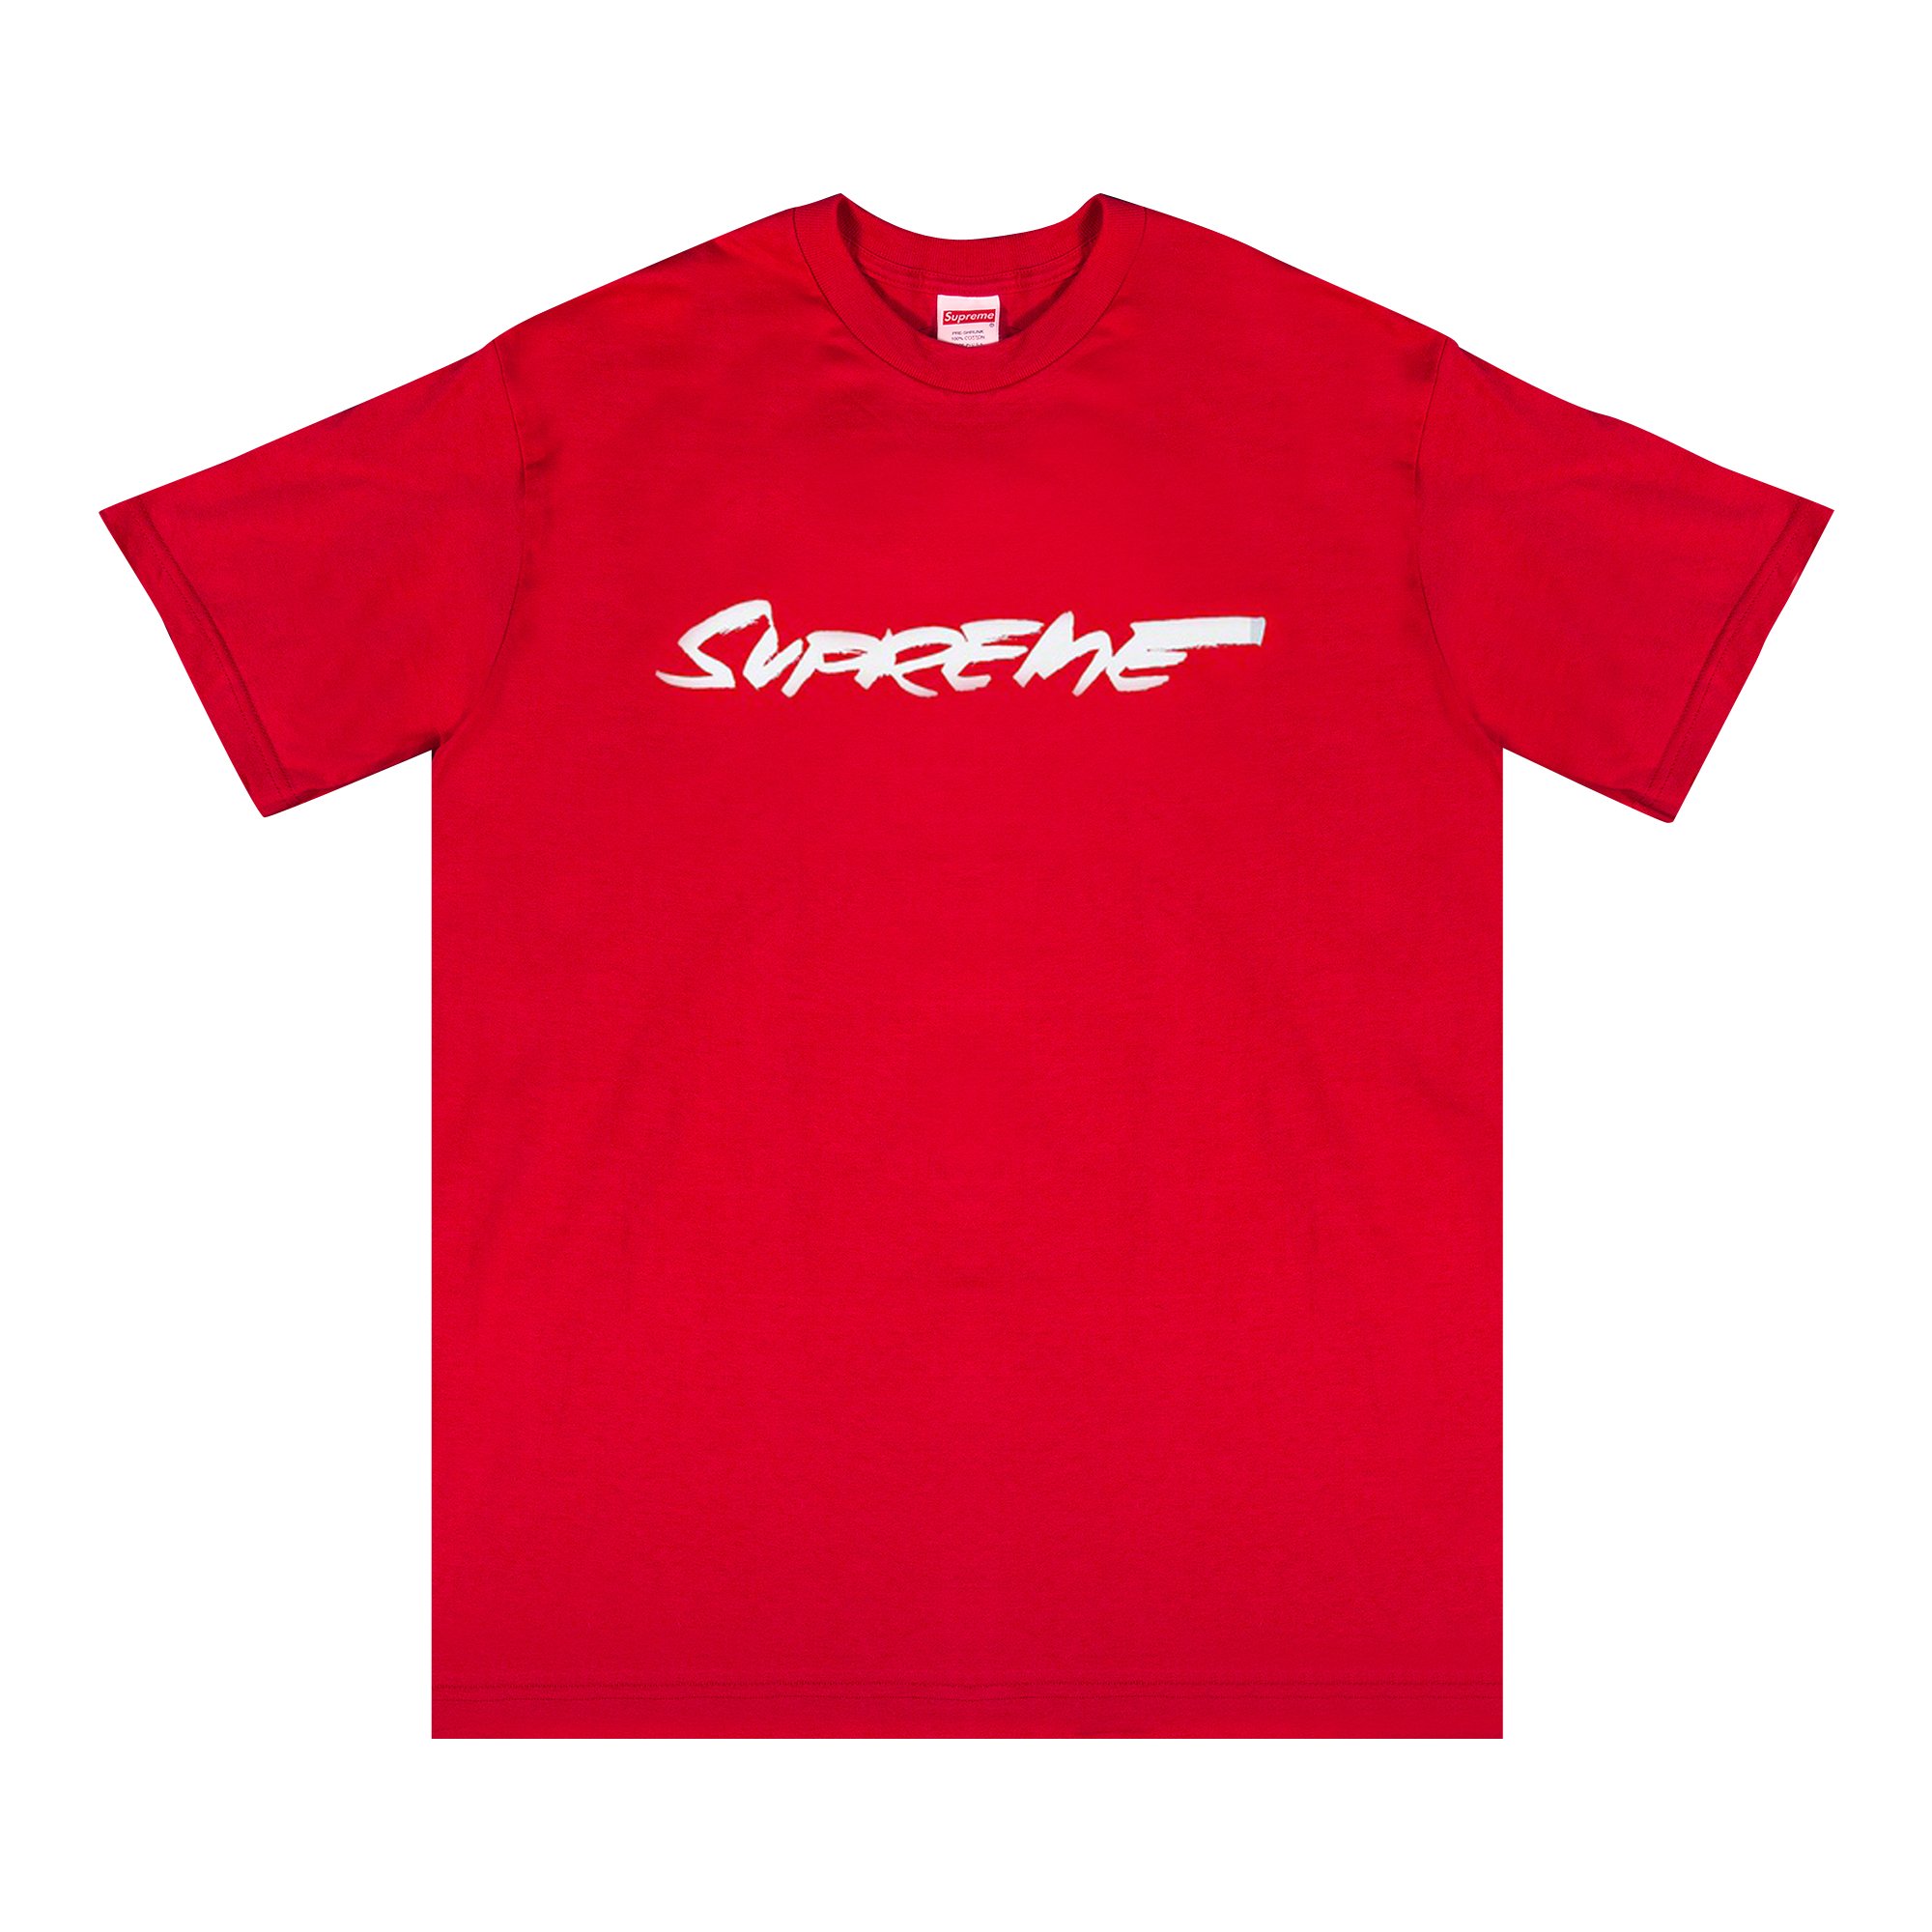 Buy Supreme Futura Logo Tee 'Red' - FW20T18 RED | GOAT